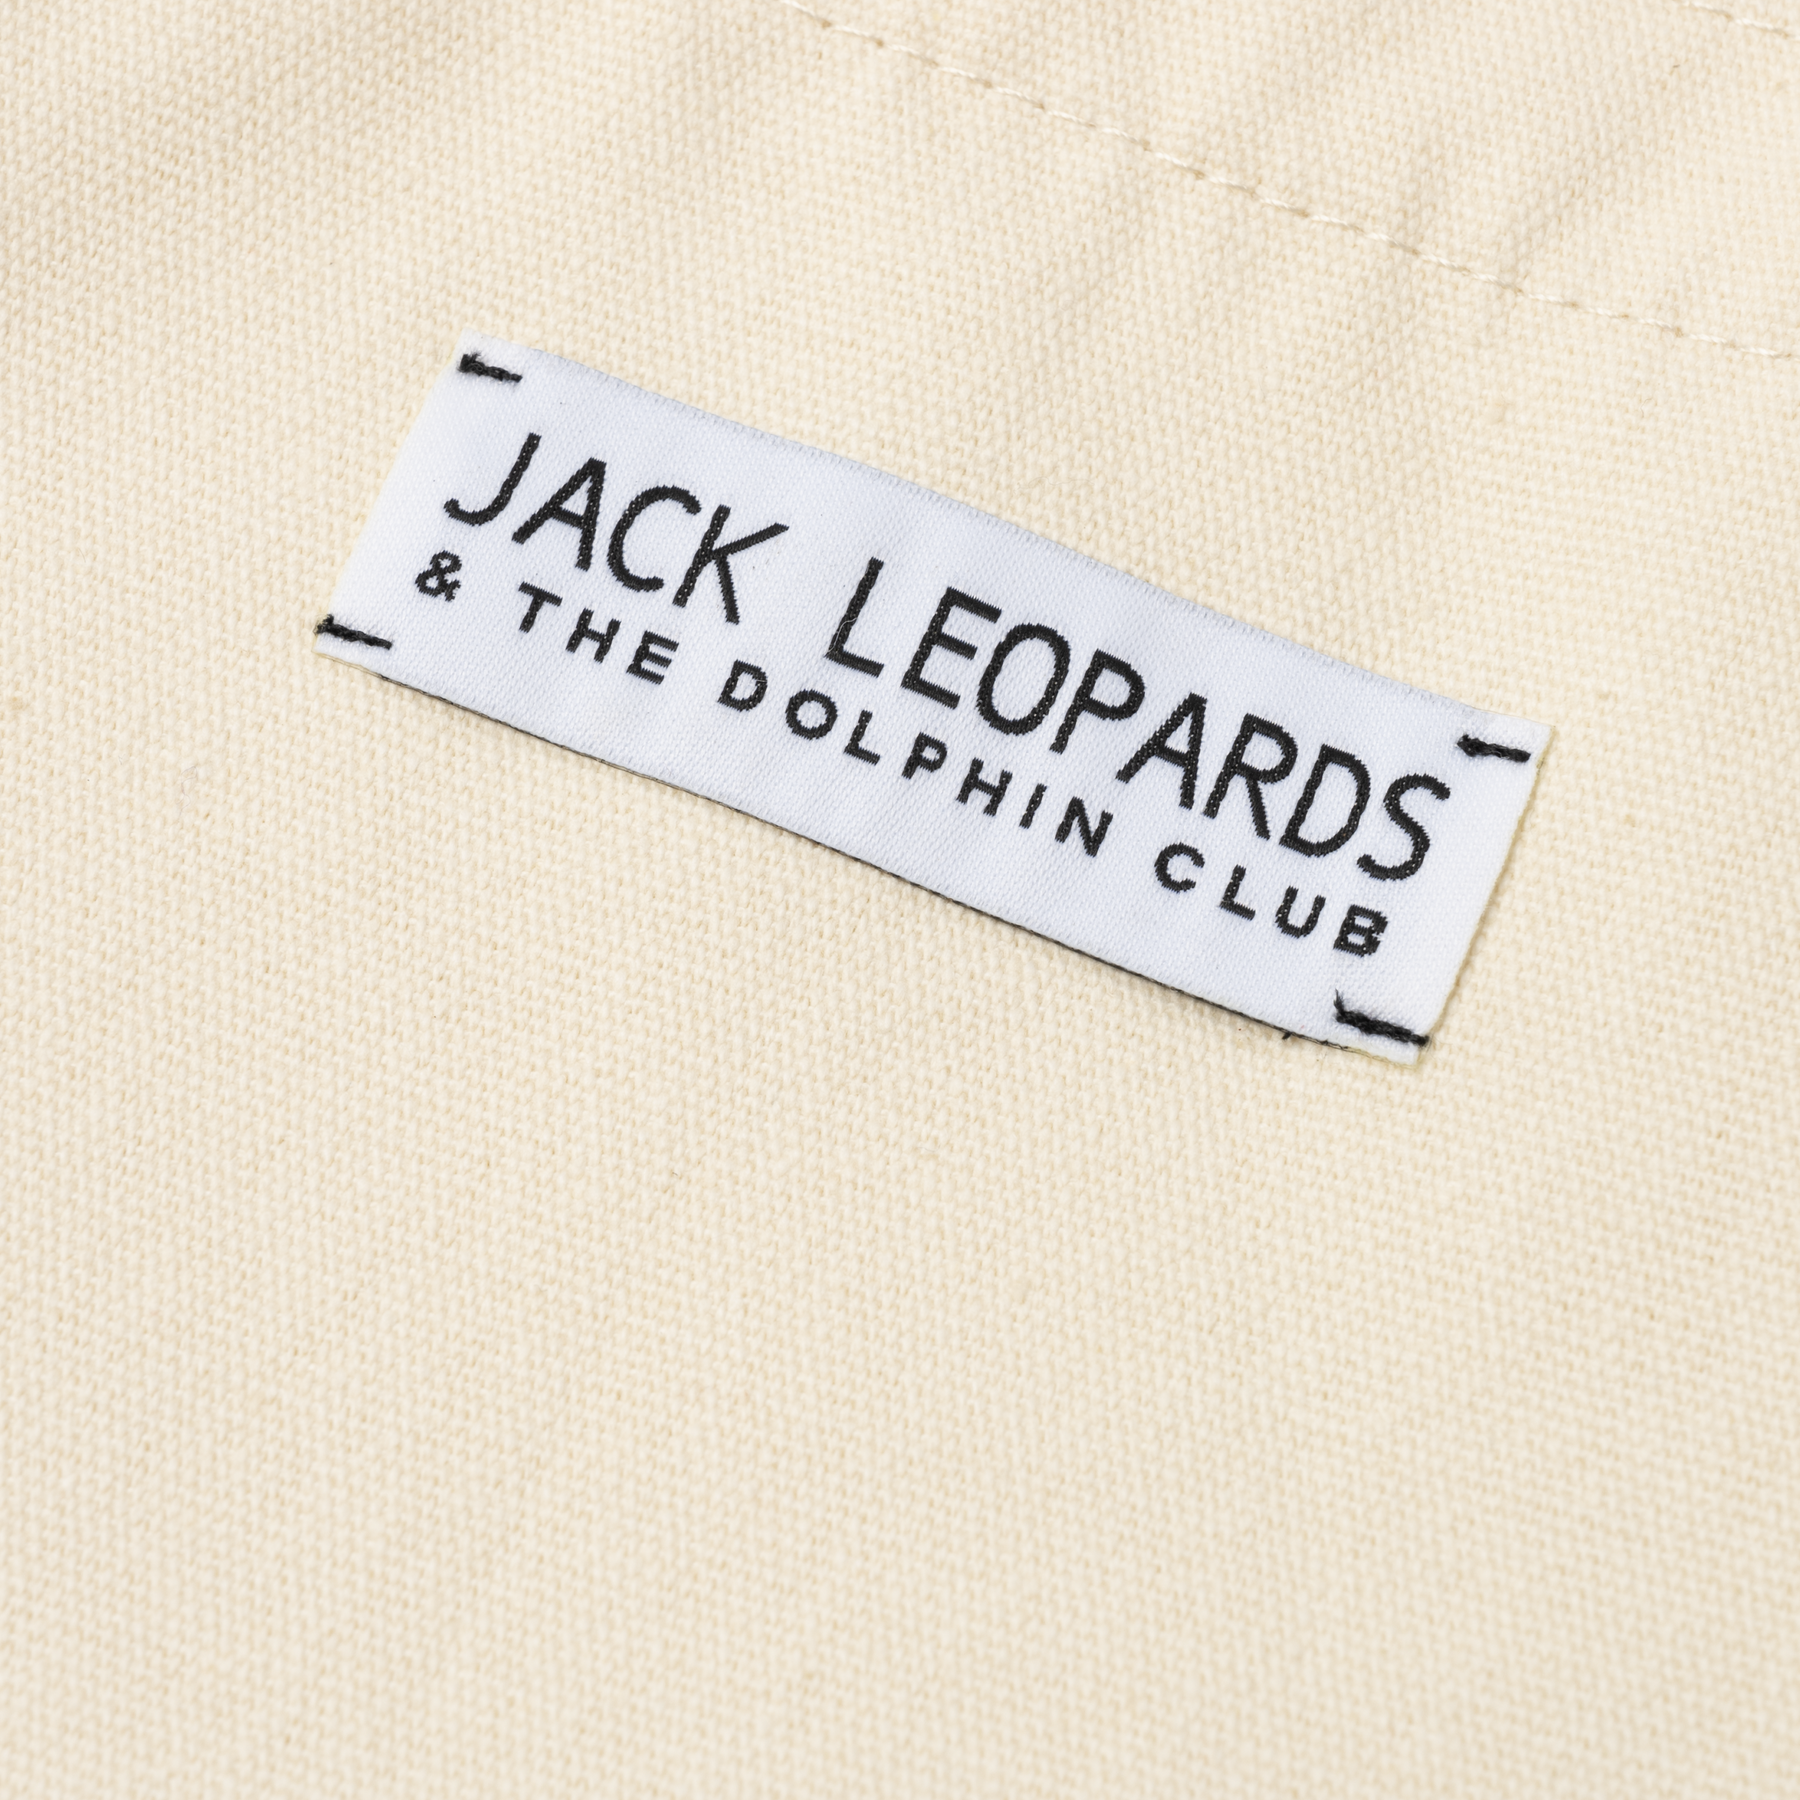 Jack Leopards & The Dolphin Club Tote Bag